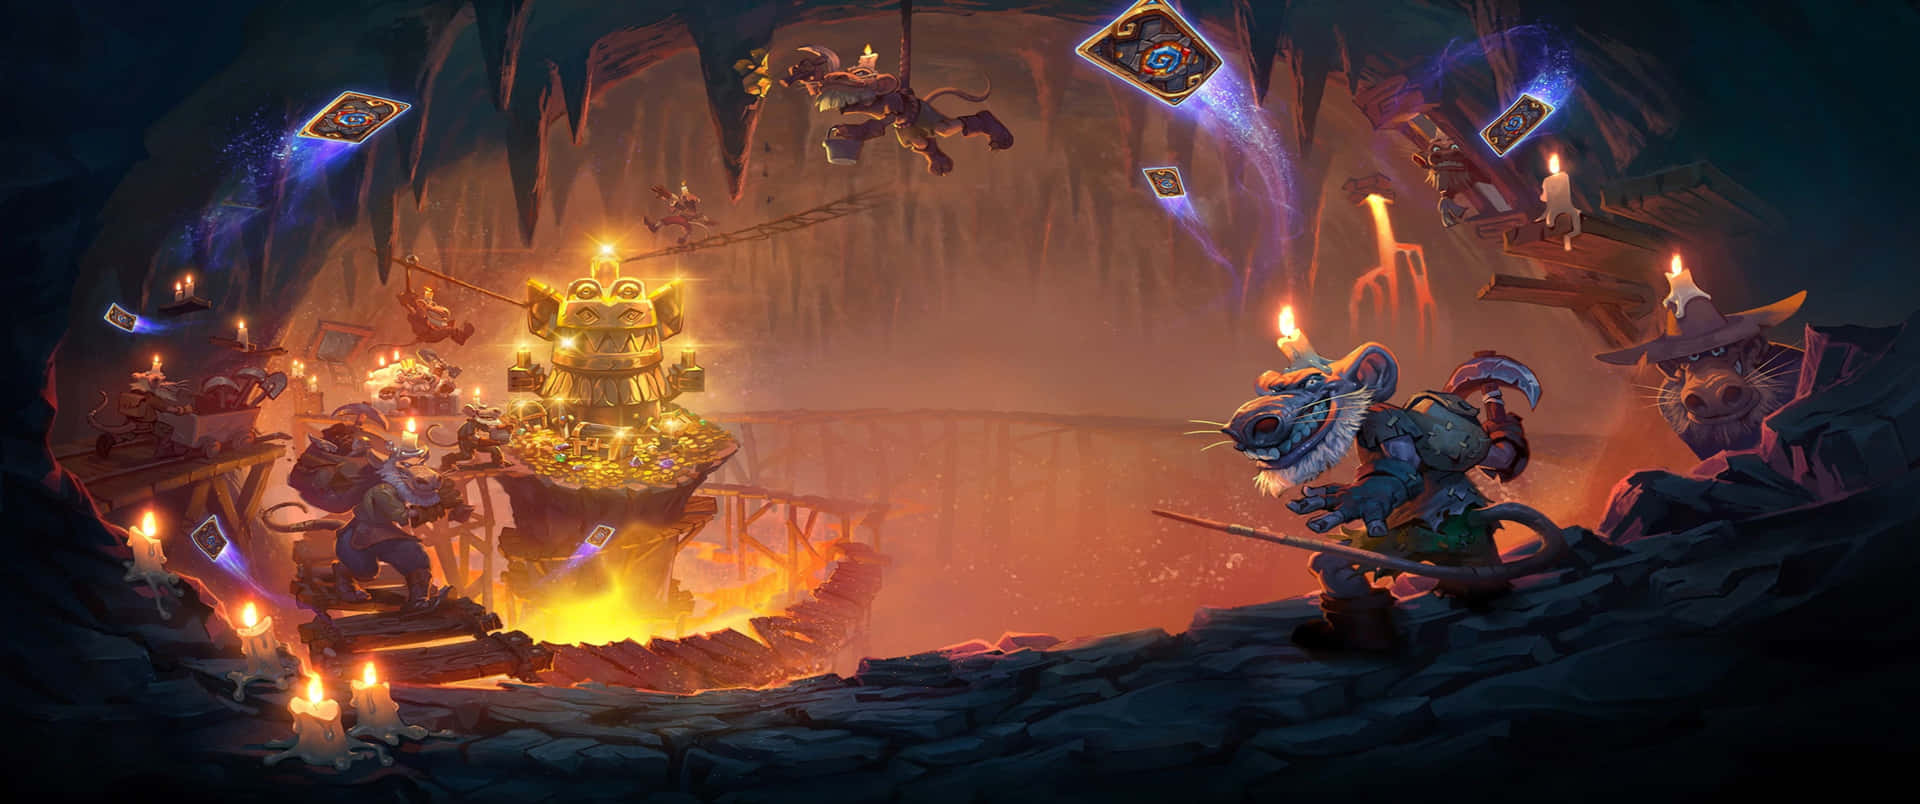 A delightfully detailed gaming experience awaits in Hearthstone.